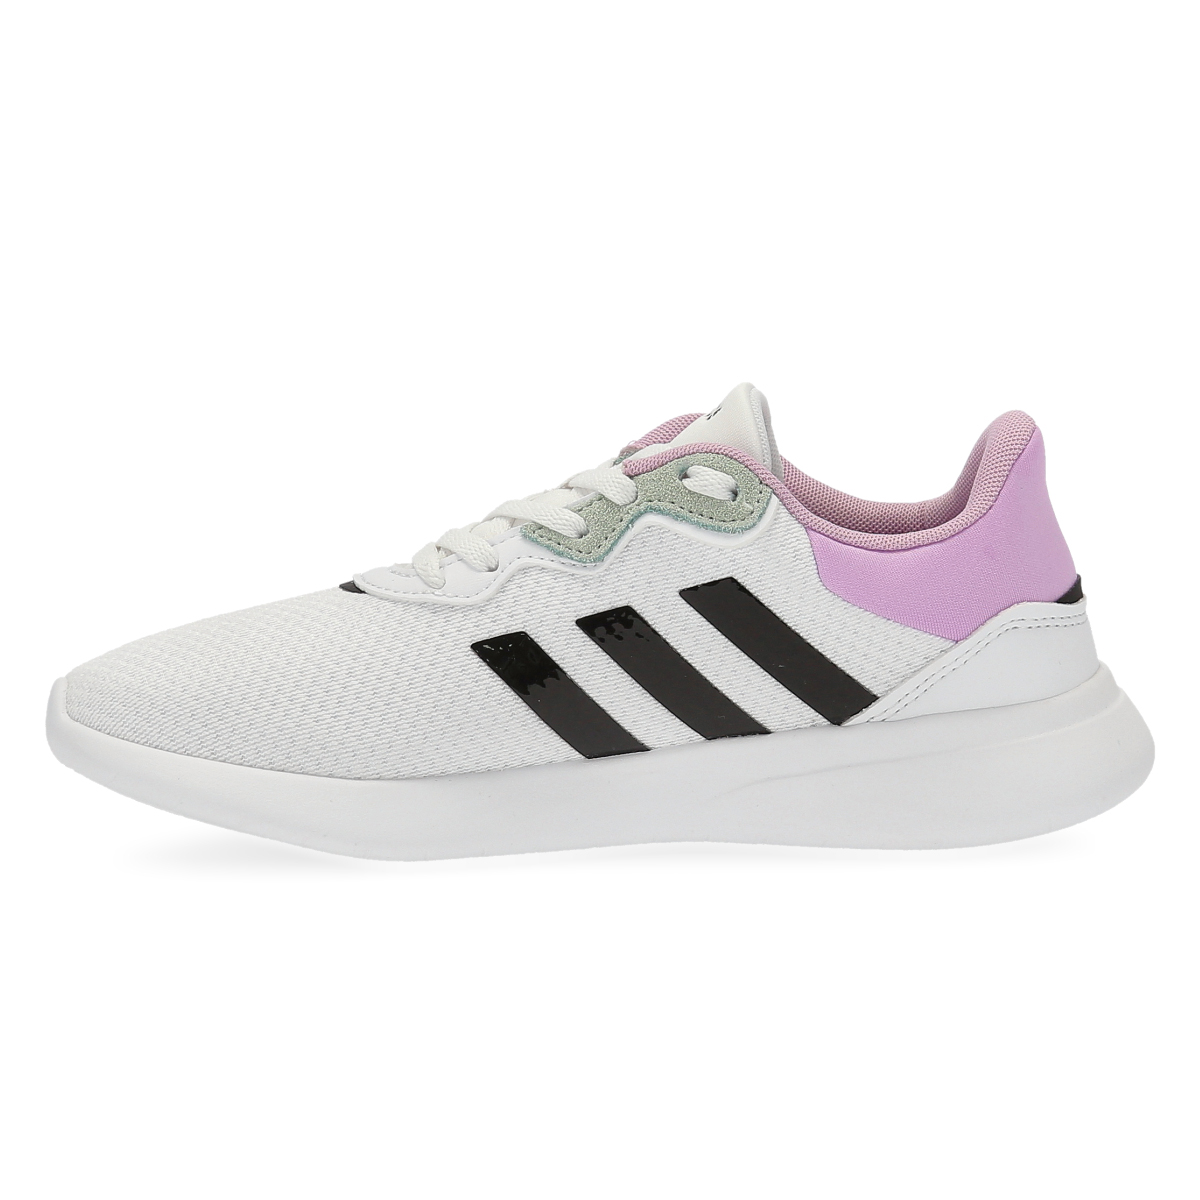 Zapatillas adidas Qt Racer 3.0 Mujer,  image number null